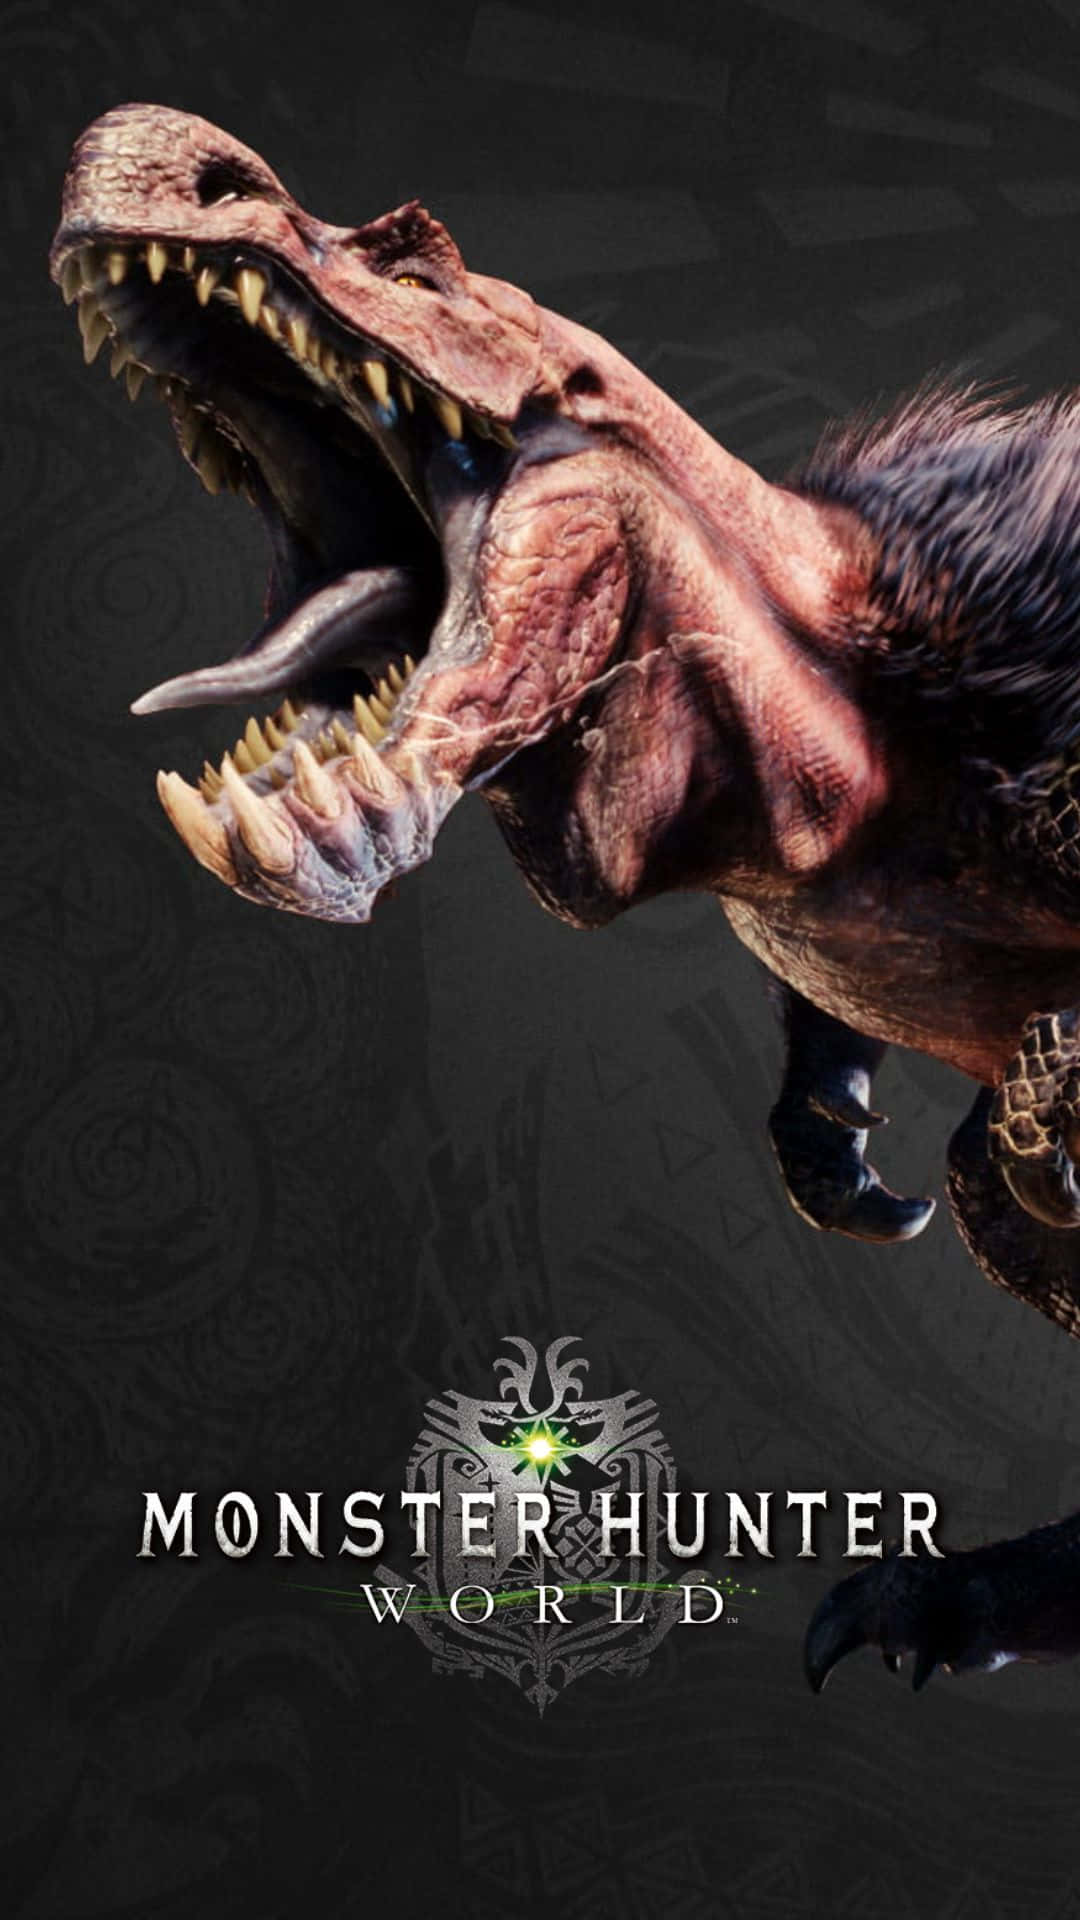 "Take on the world and unleash your inner hunter with Android Monster Hunter World"